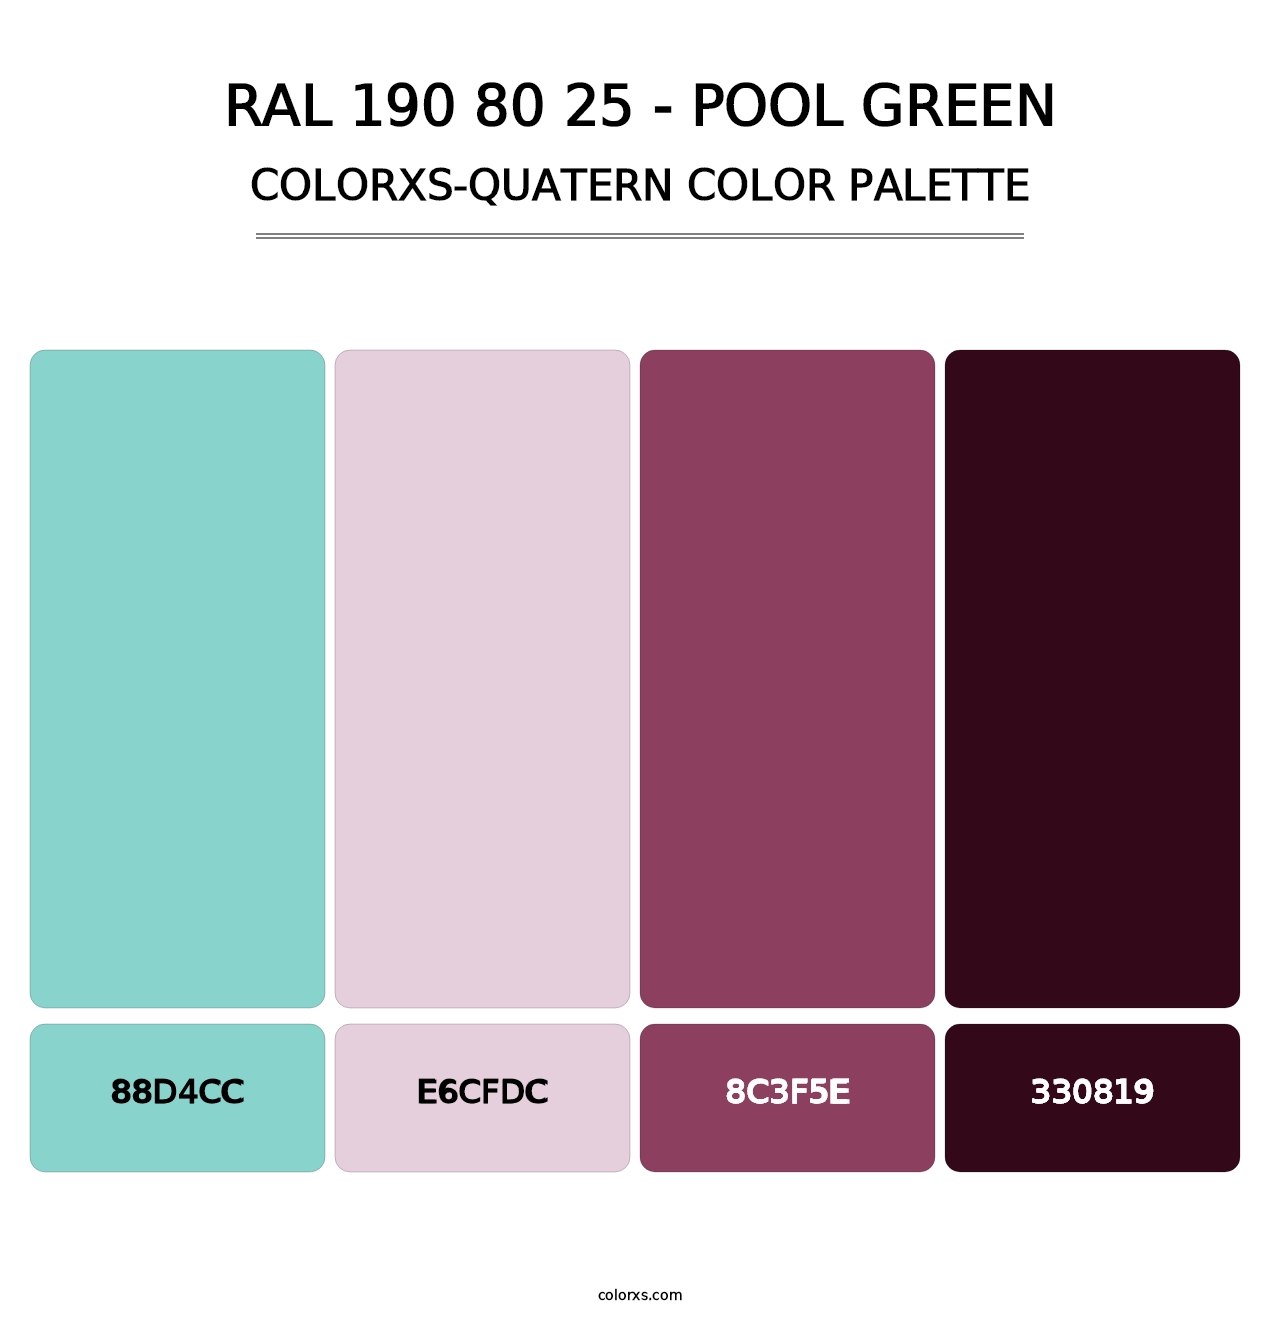 RAL 190 80 25 - Pool Green - Colorxs Quatern Palette